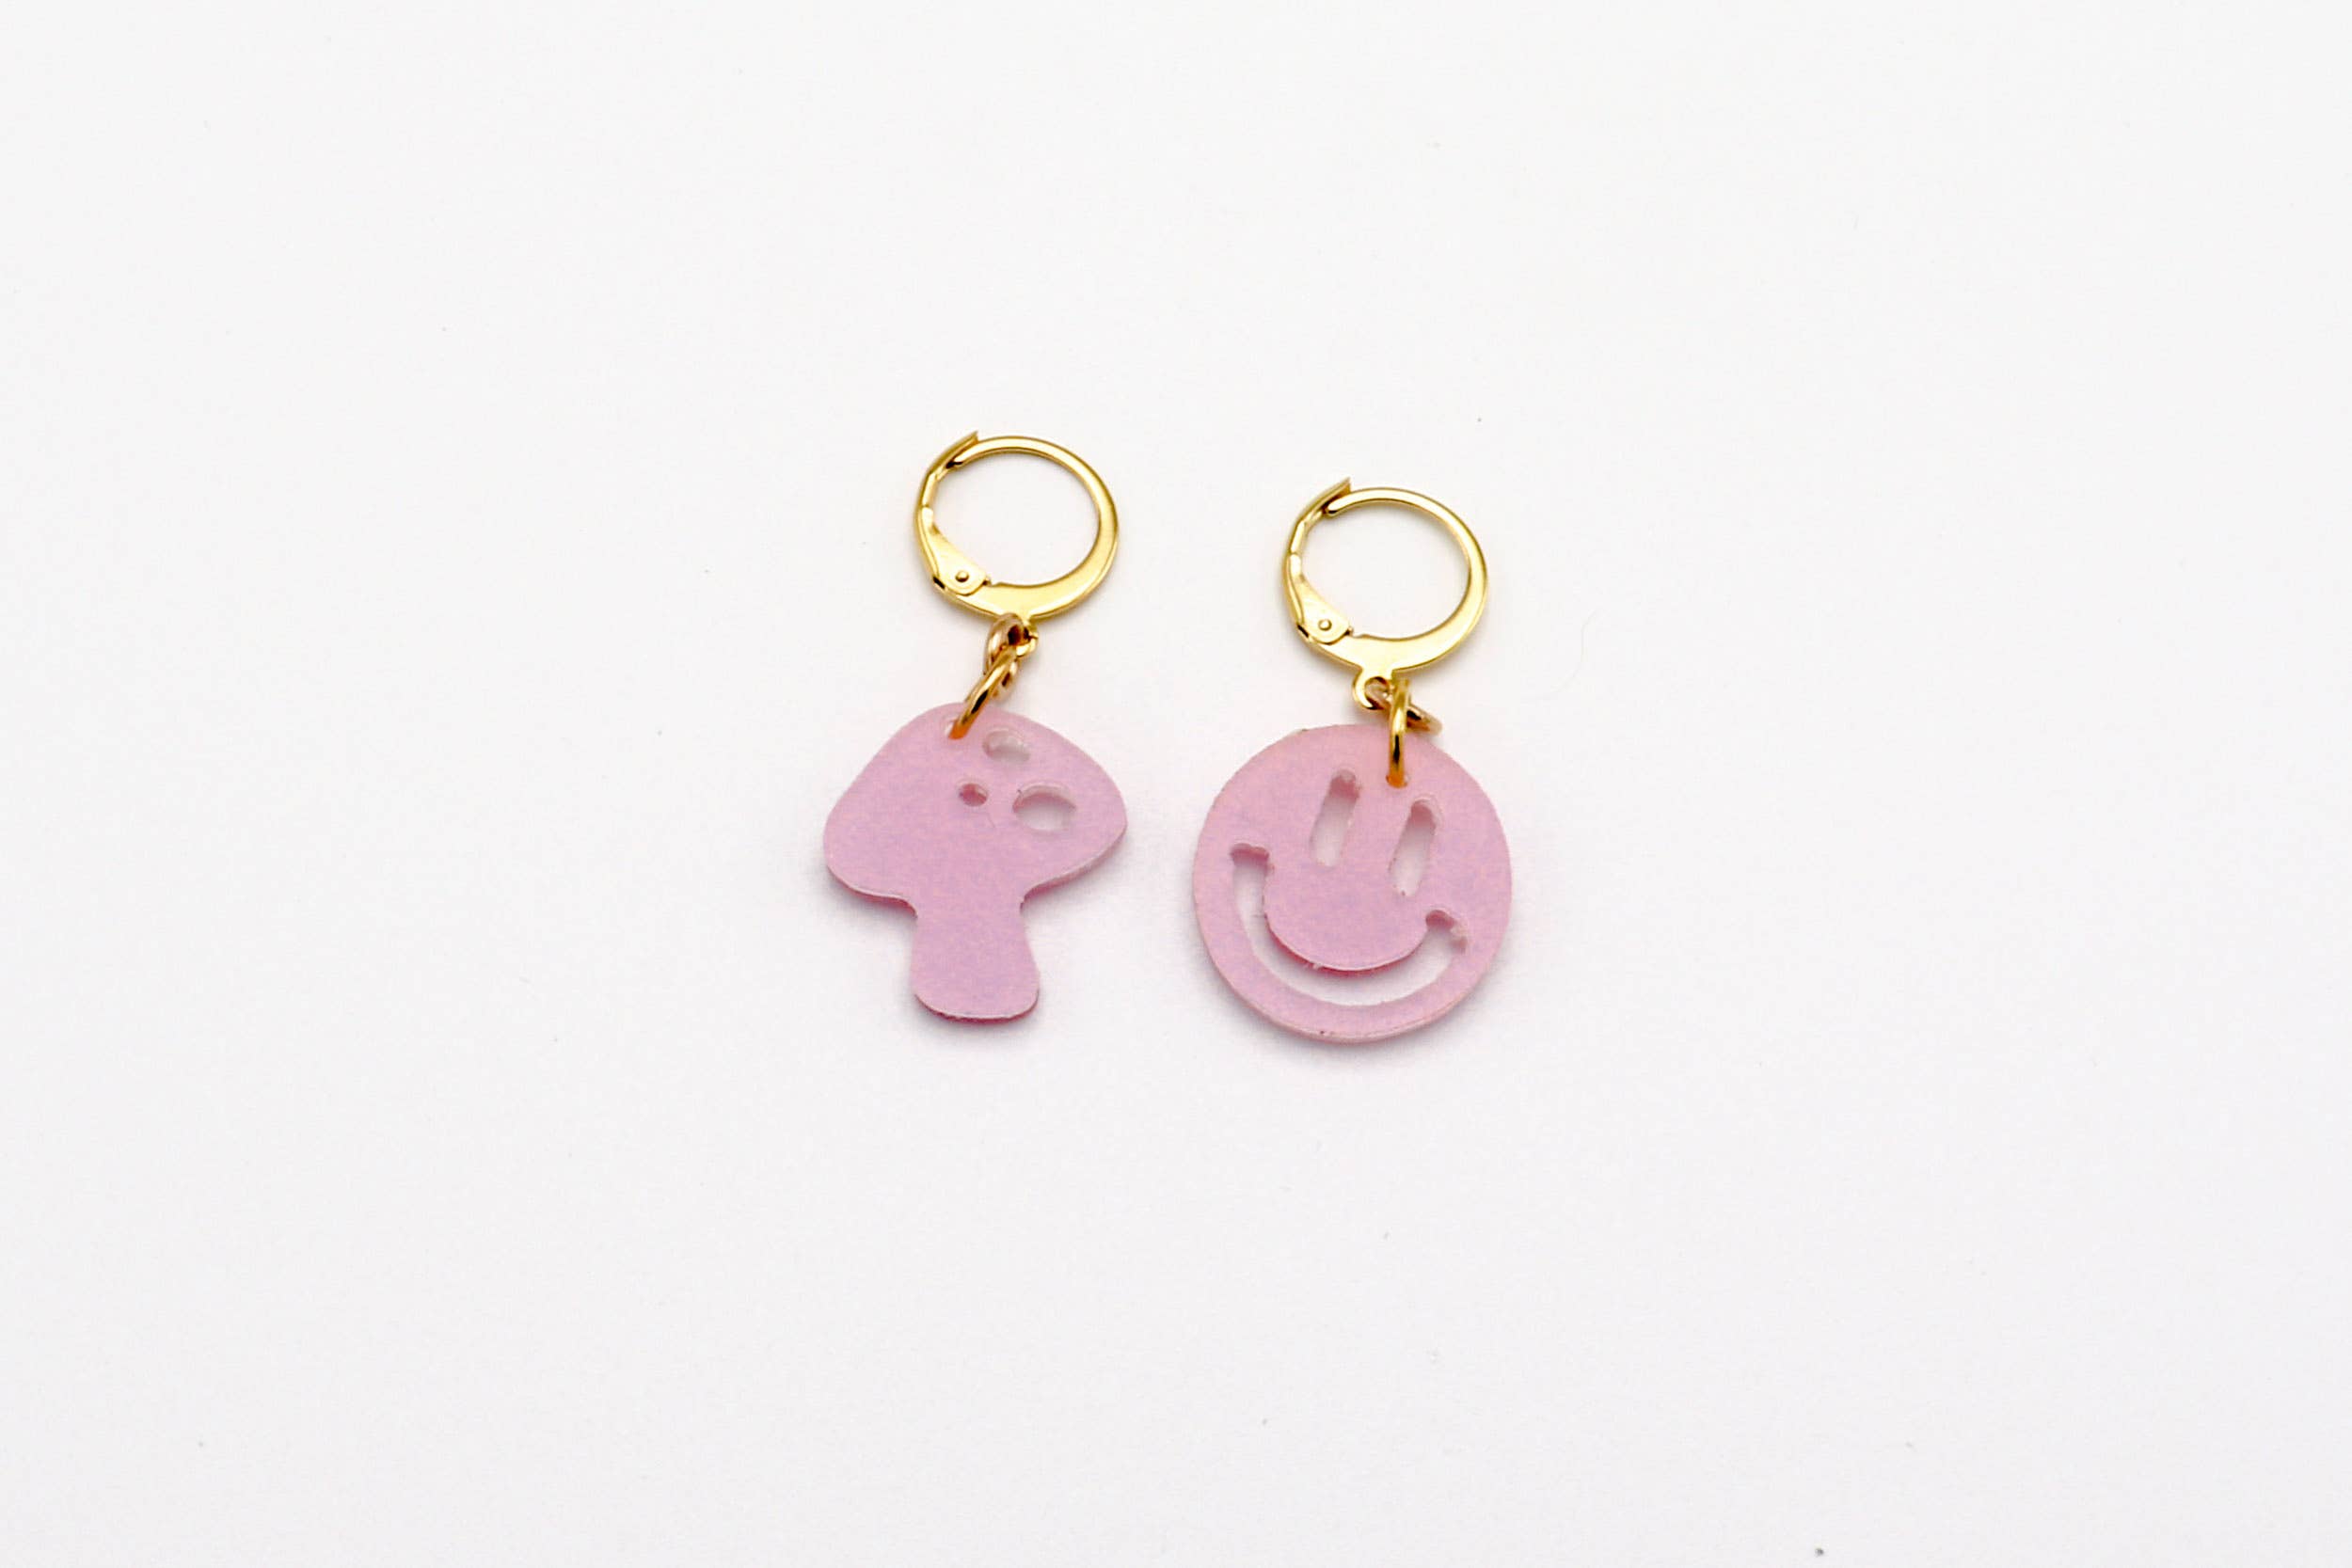 Charm Dangles - Mushrooms and Smiles